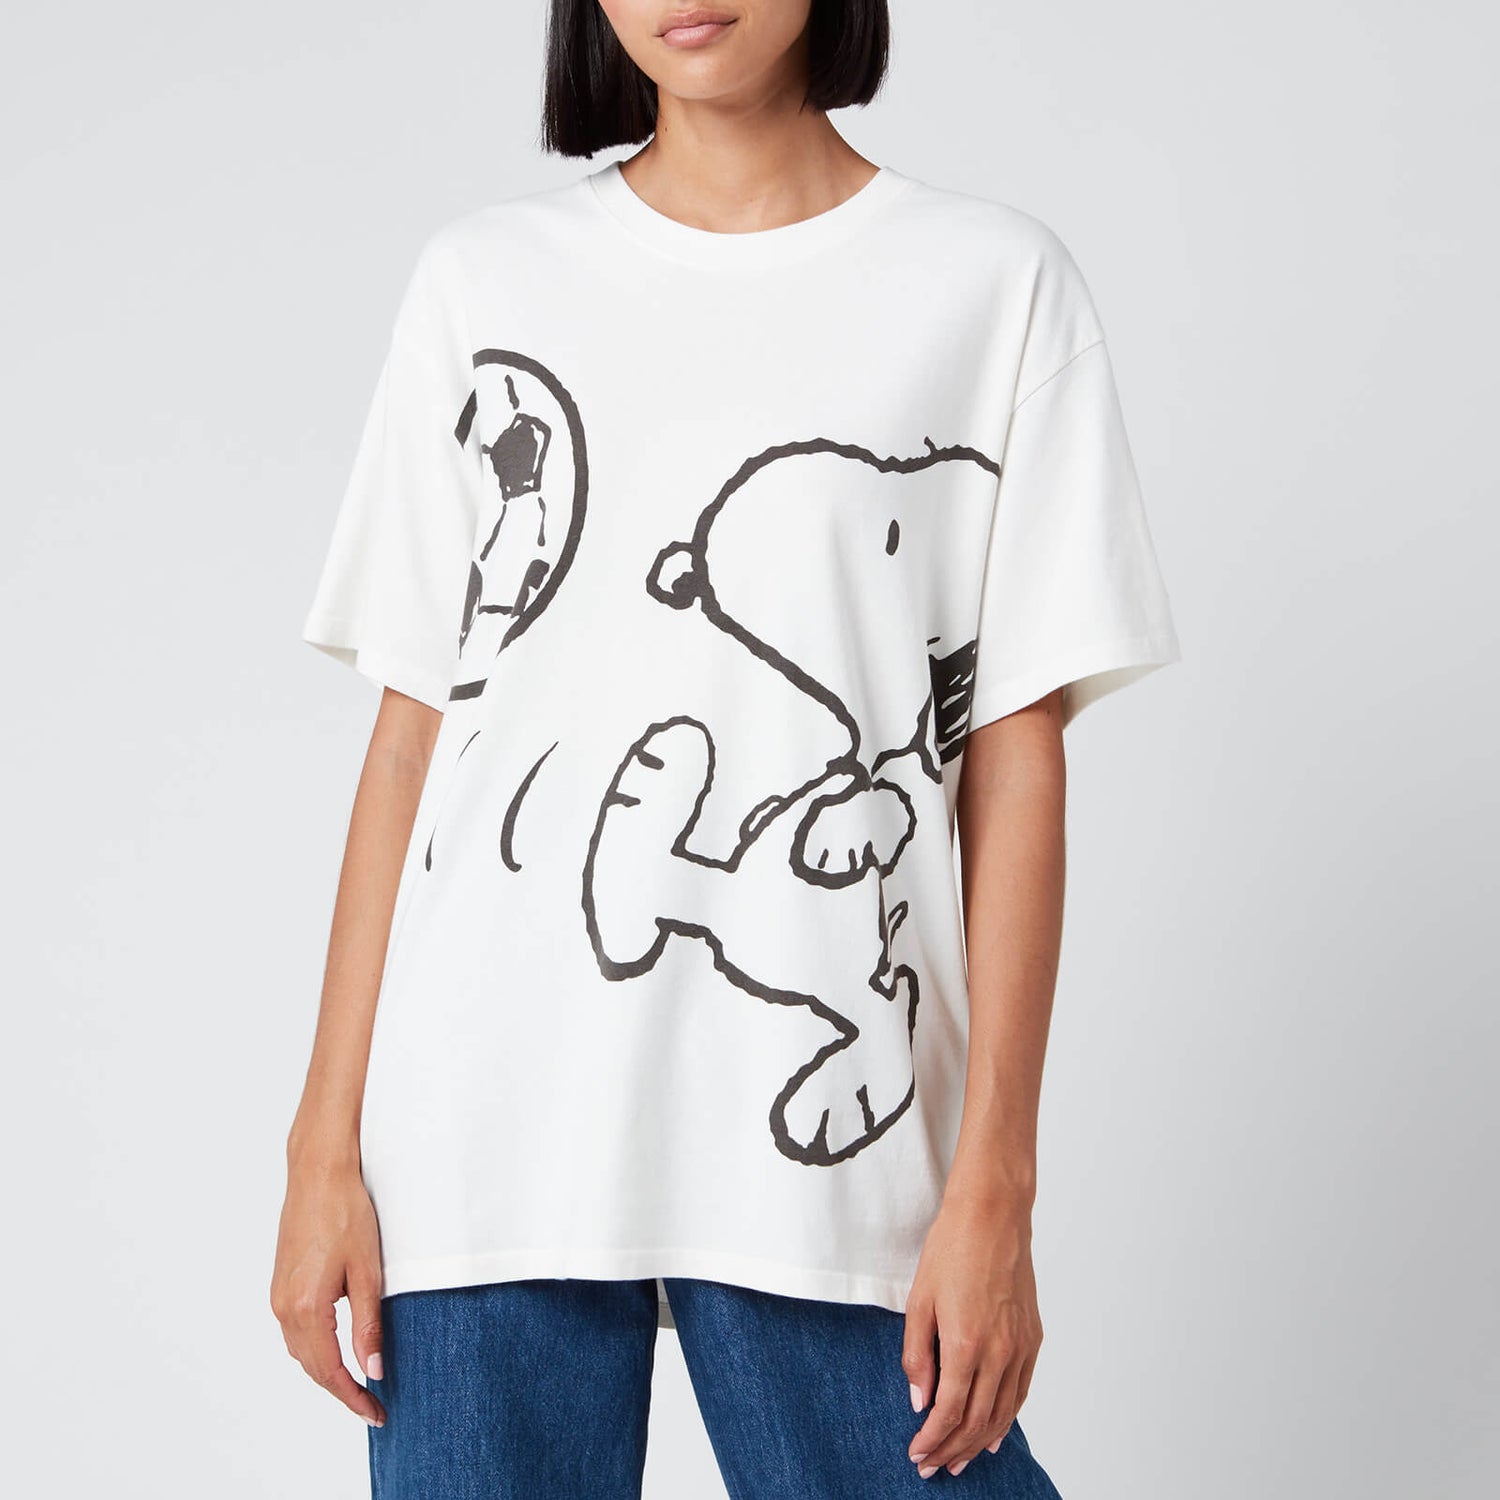 Tee-shirt LEVIS GRAPHIC PEANUTS® Snoopy batwing white 